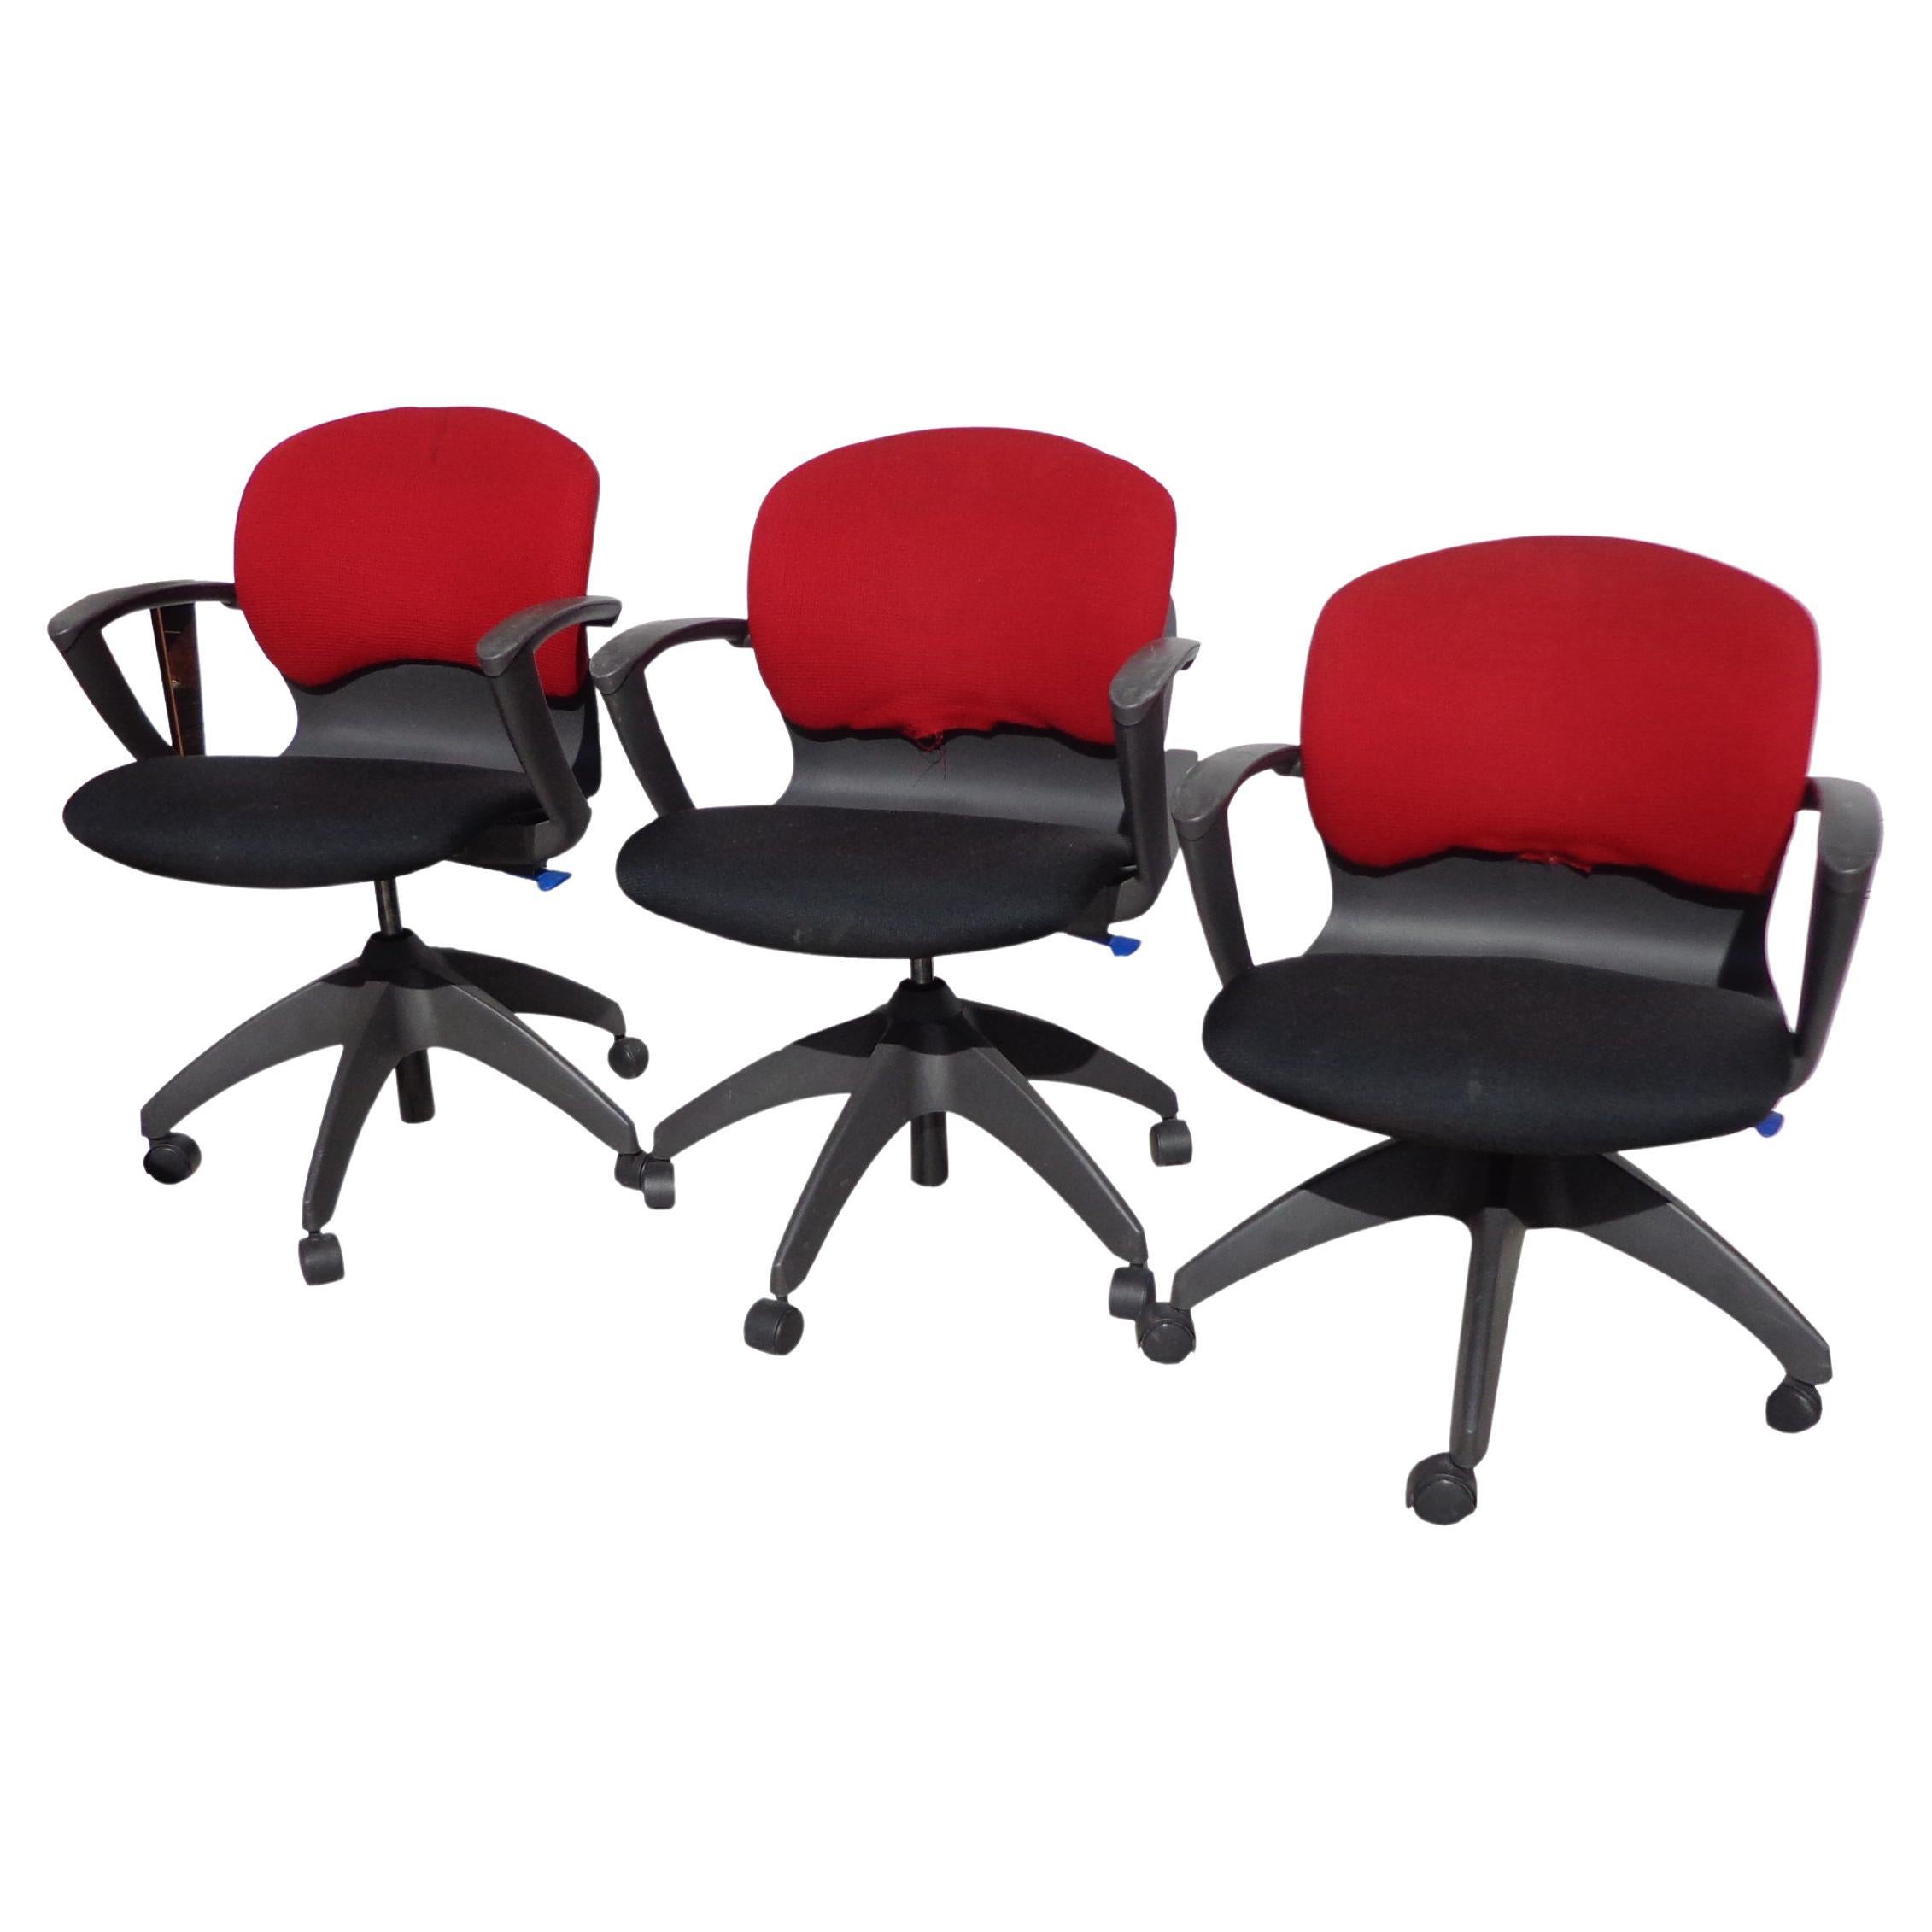 1 SOHO Task chair by Roberto Lucci & Paolo Orlandini for Knoll

Ergonomical design from 1994, this award winning chair features a wide seat that slides forward for additional comfort.
Price for 1
3 available.
 